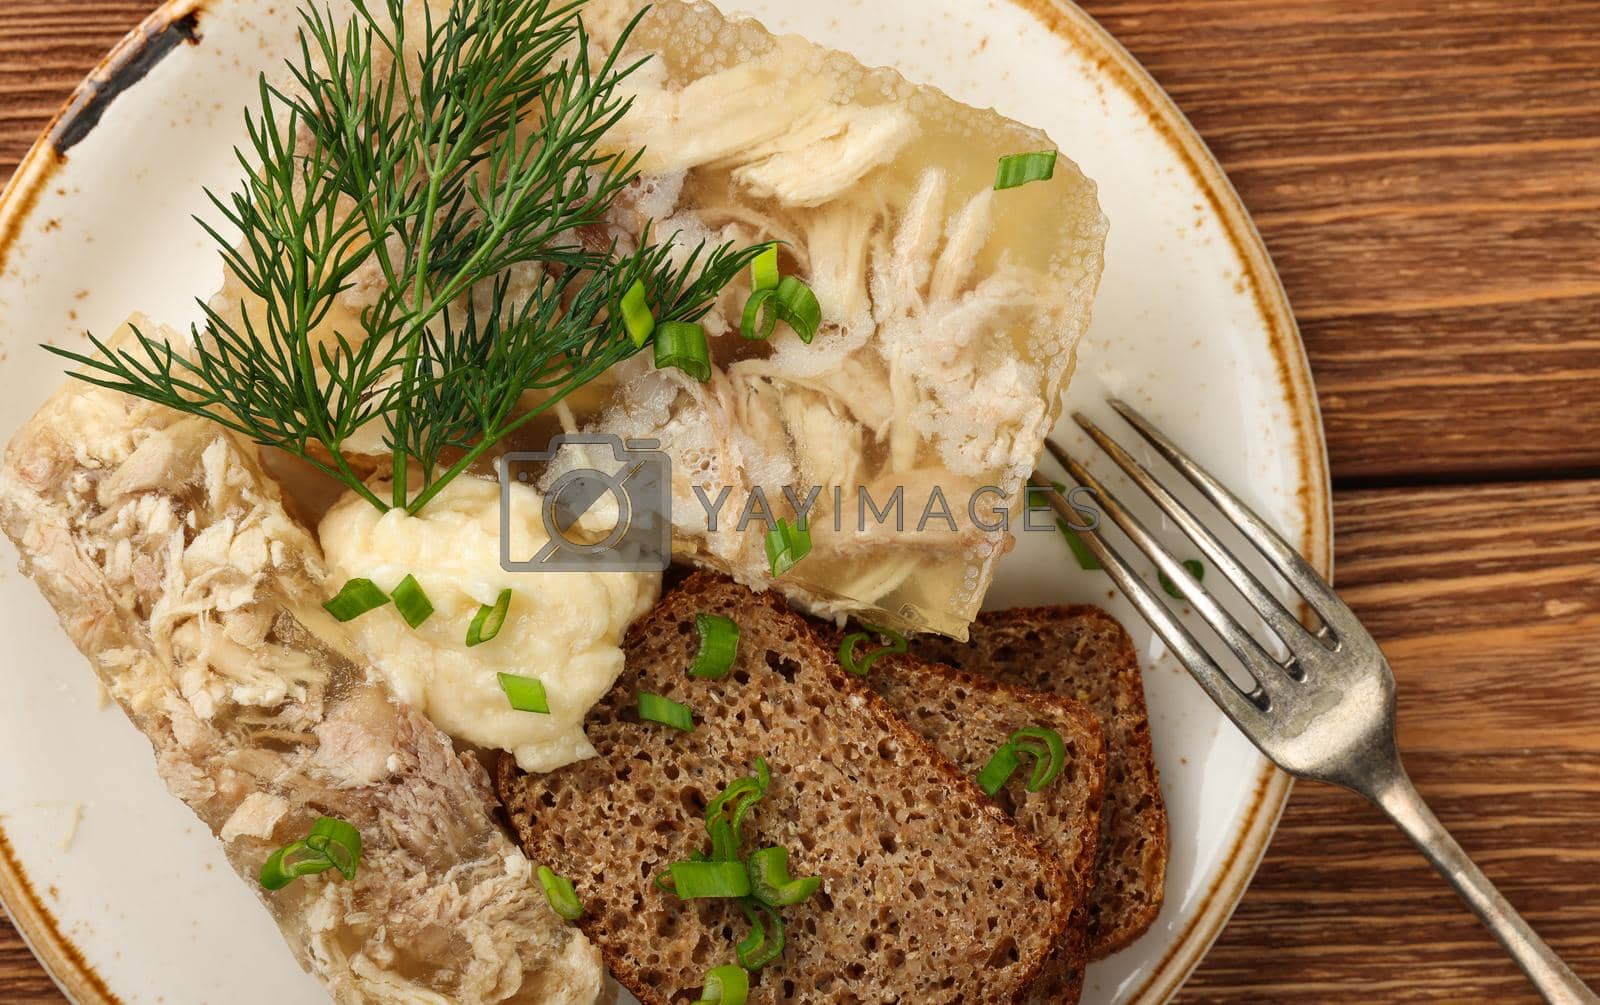 Royalty free image of Aspic or meat jelly portion with rye bread by BreakingTheWalls